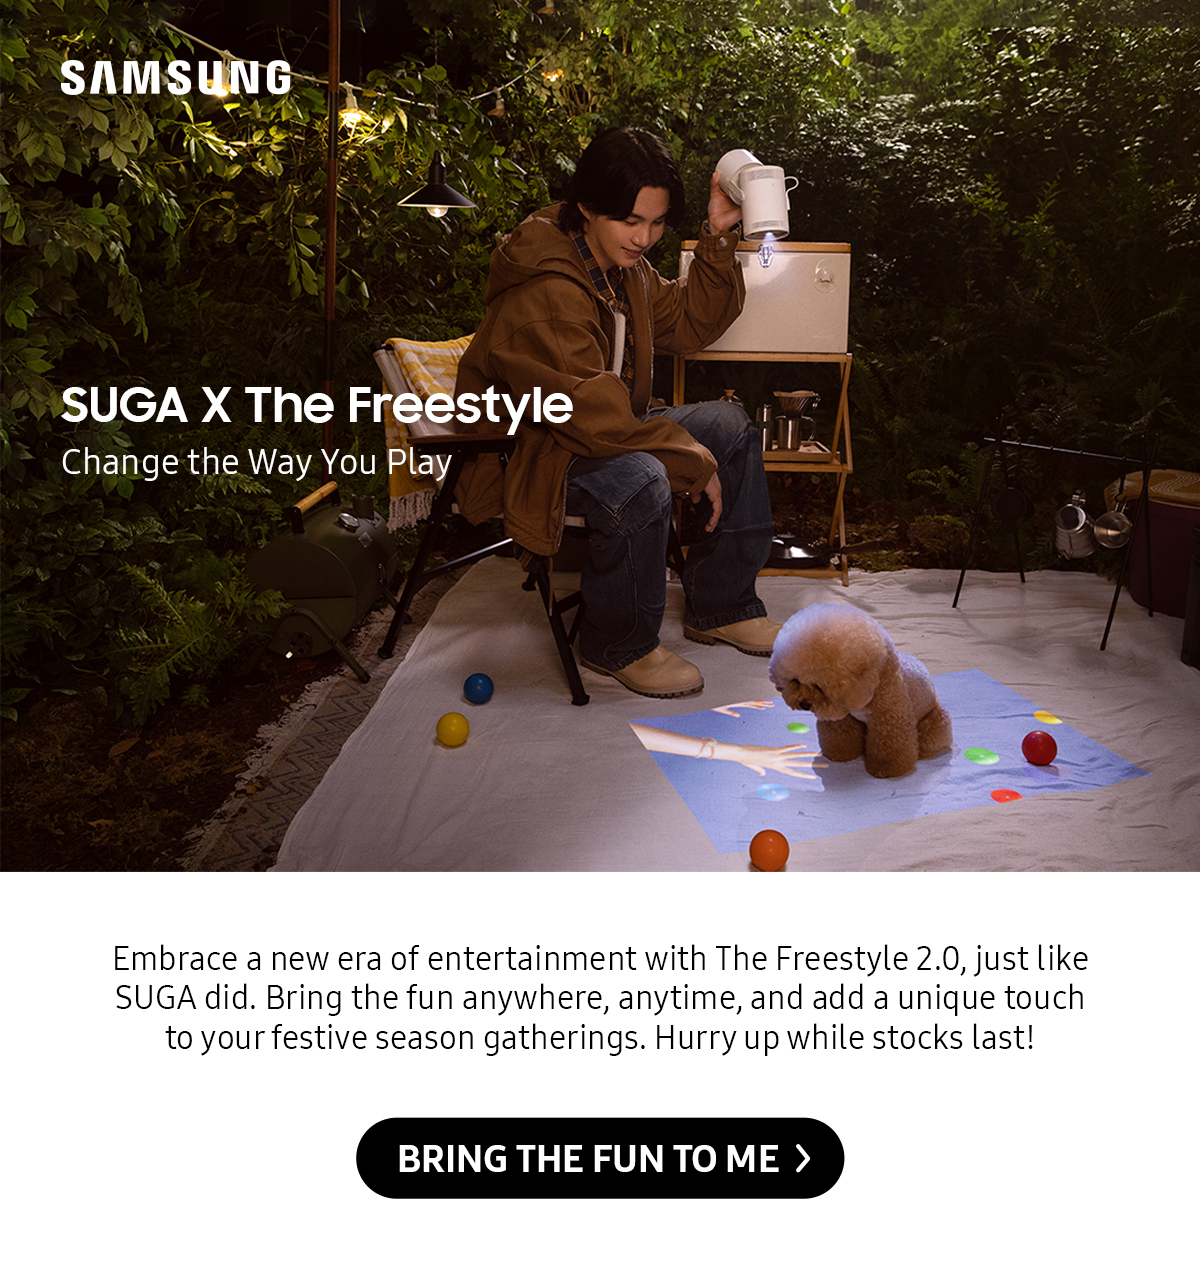 SUGA x The Freestyle | Embrace a new era of entertainment with The Freestyle 2.0, just like SUGA did. Bring the fun anywhere, anytime, and add a unique touch to your festive season gatherings. Hurry up while stocks last! Click here to get yours!